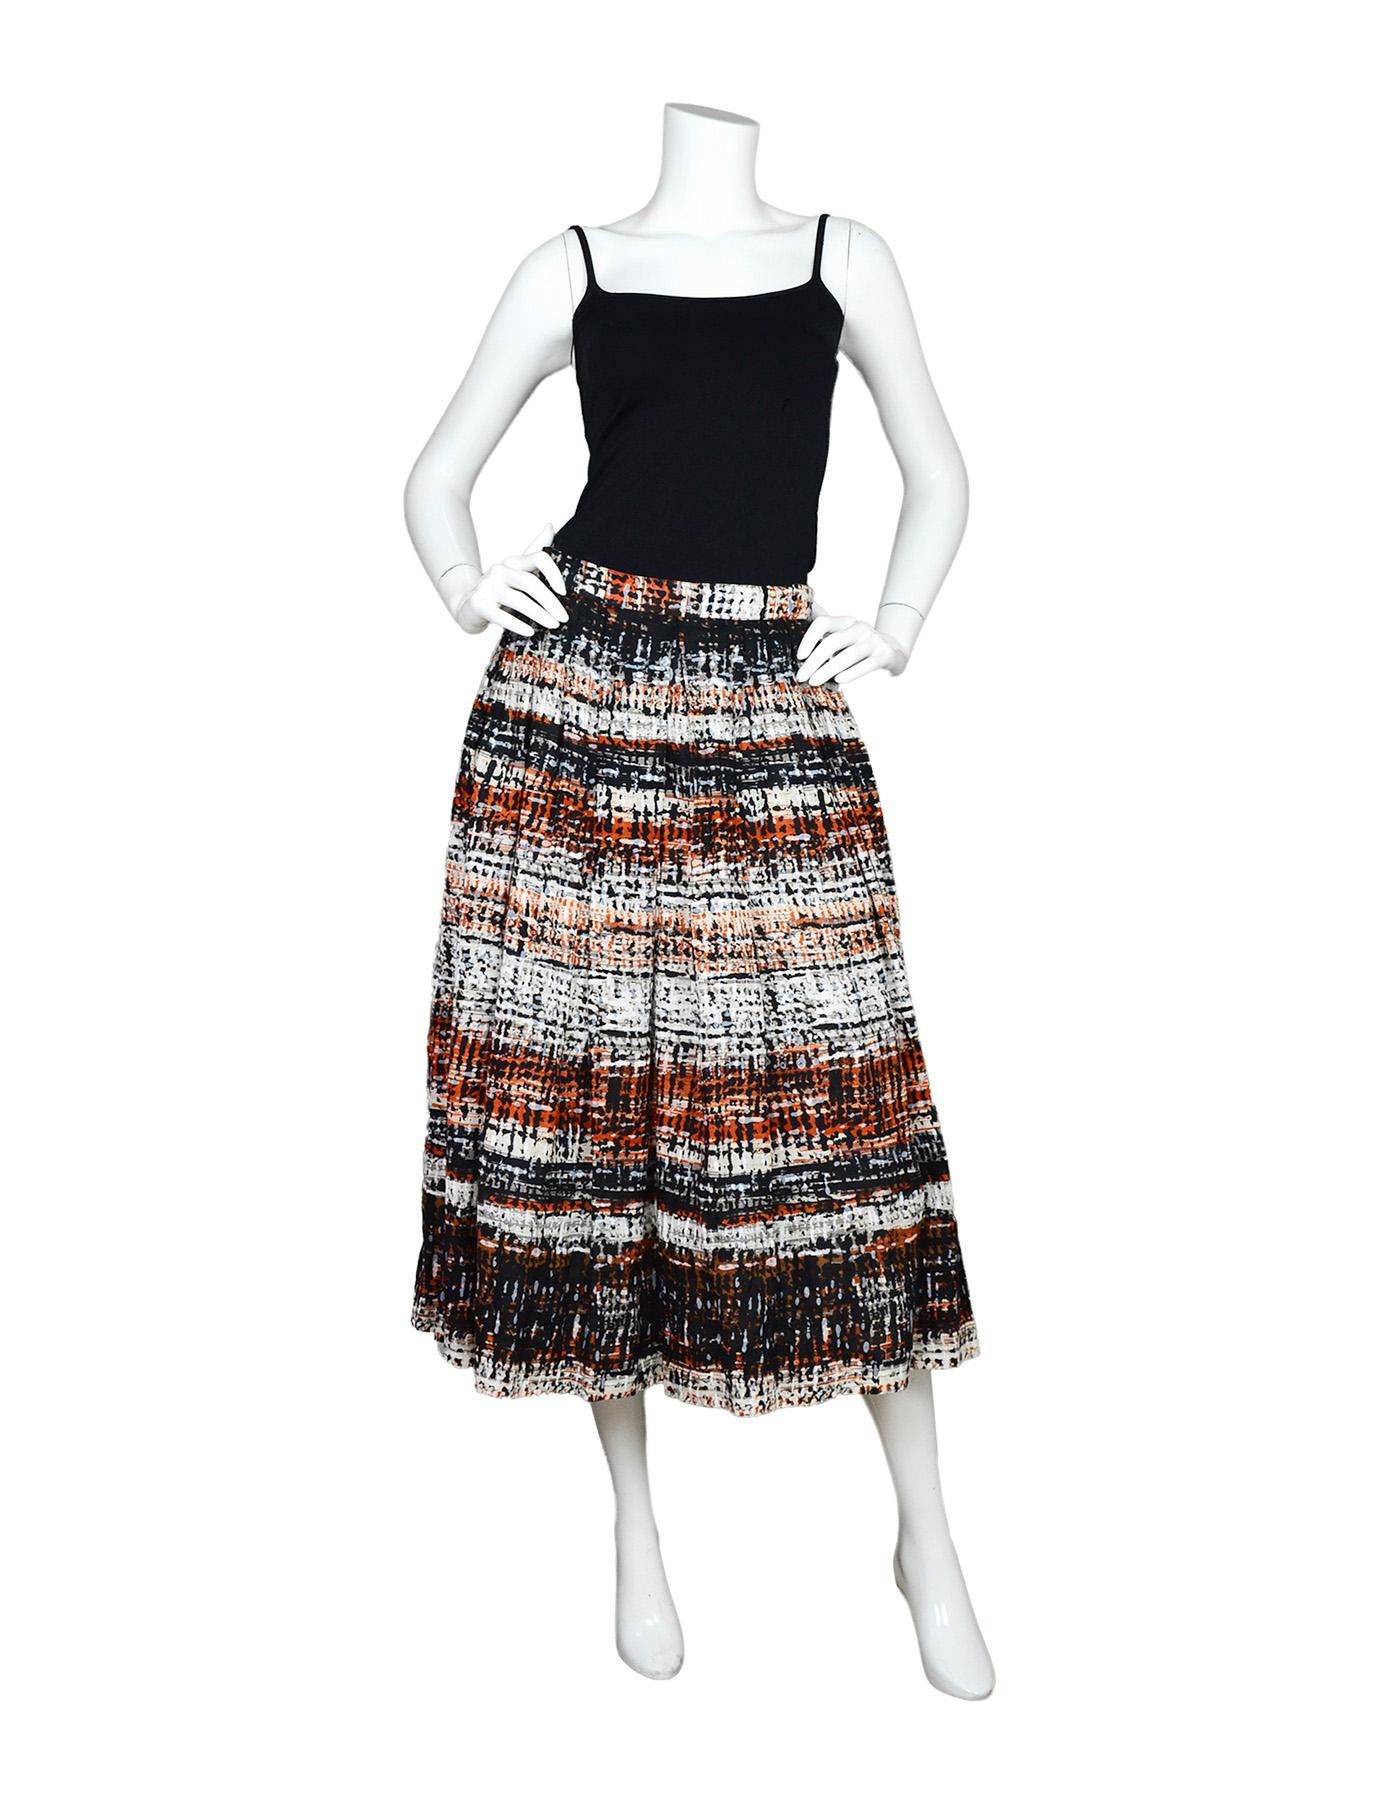 Proenza Schouler Multi-Color Printed Long Pleated Midi Skirt Sz 6

Made In: USA with fabric from Italy
Color: Multi-color, white, orange, navy 
Materials: 100% linen
Lining: 100% cotton
Opening/Closure: Side zipper
Overall Condition: Excellent